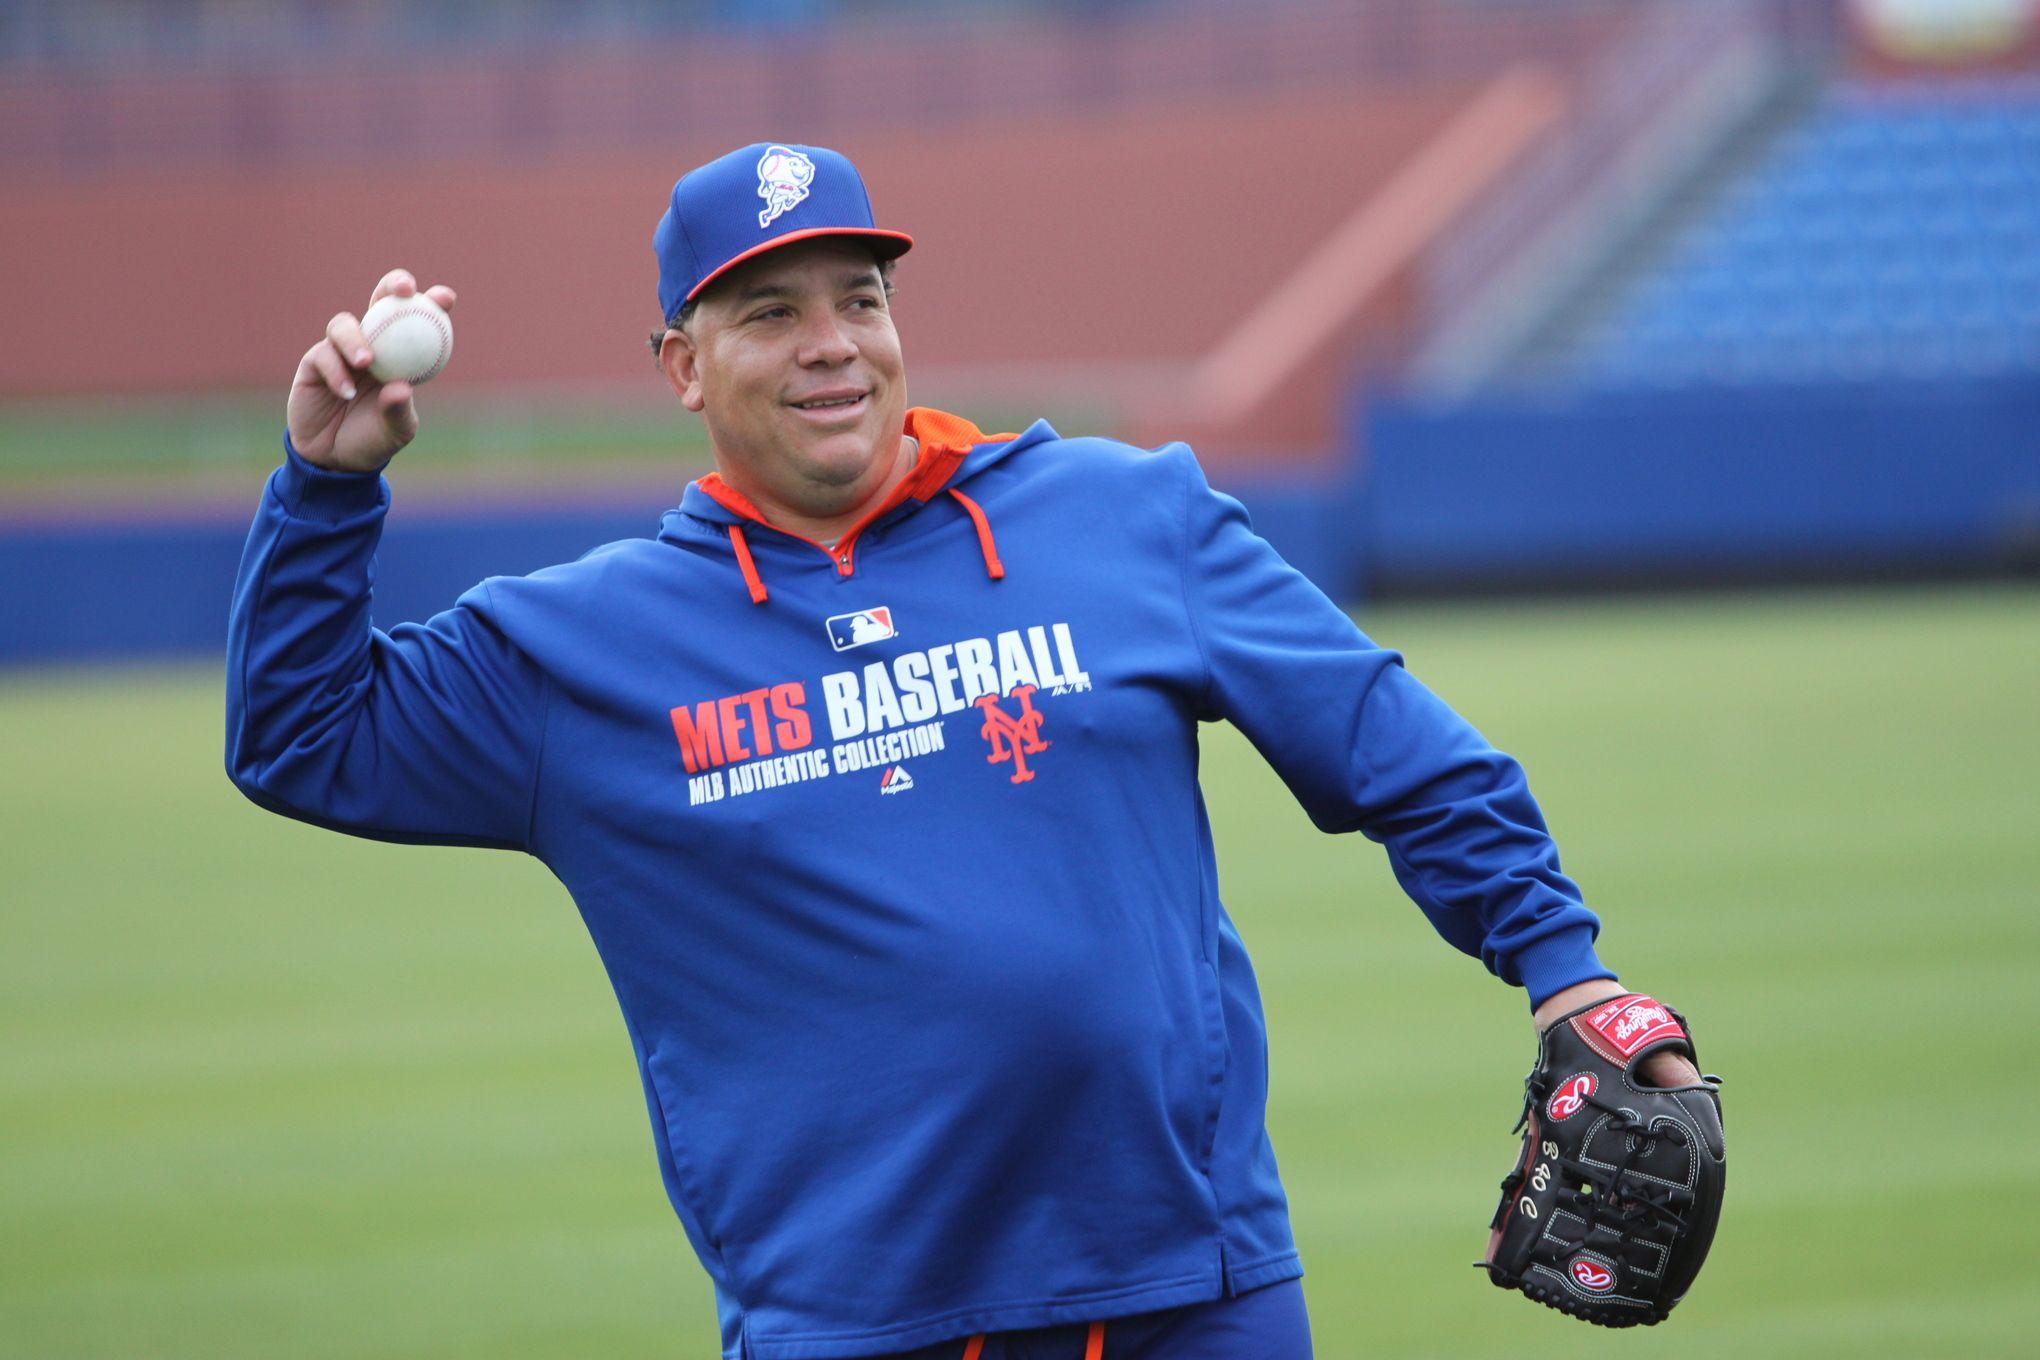 The Perception Gap, Part 3: How Mets fans, others view Bartolo